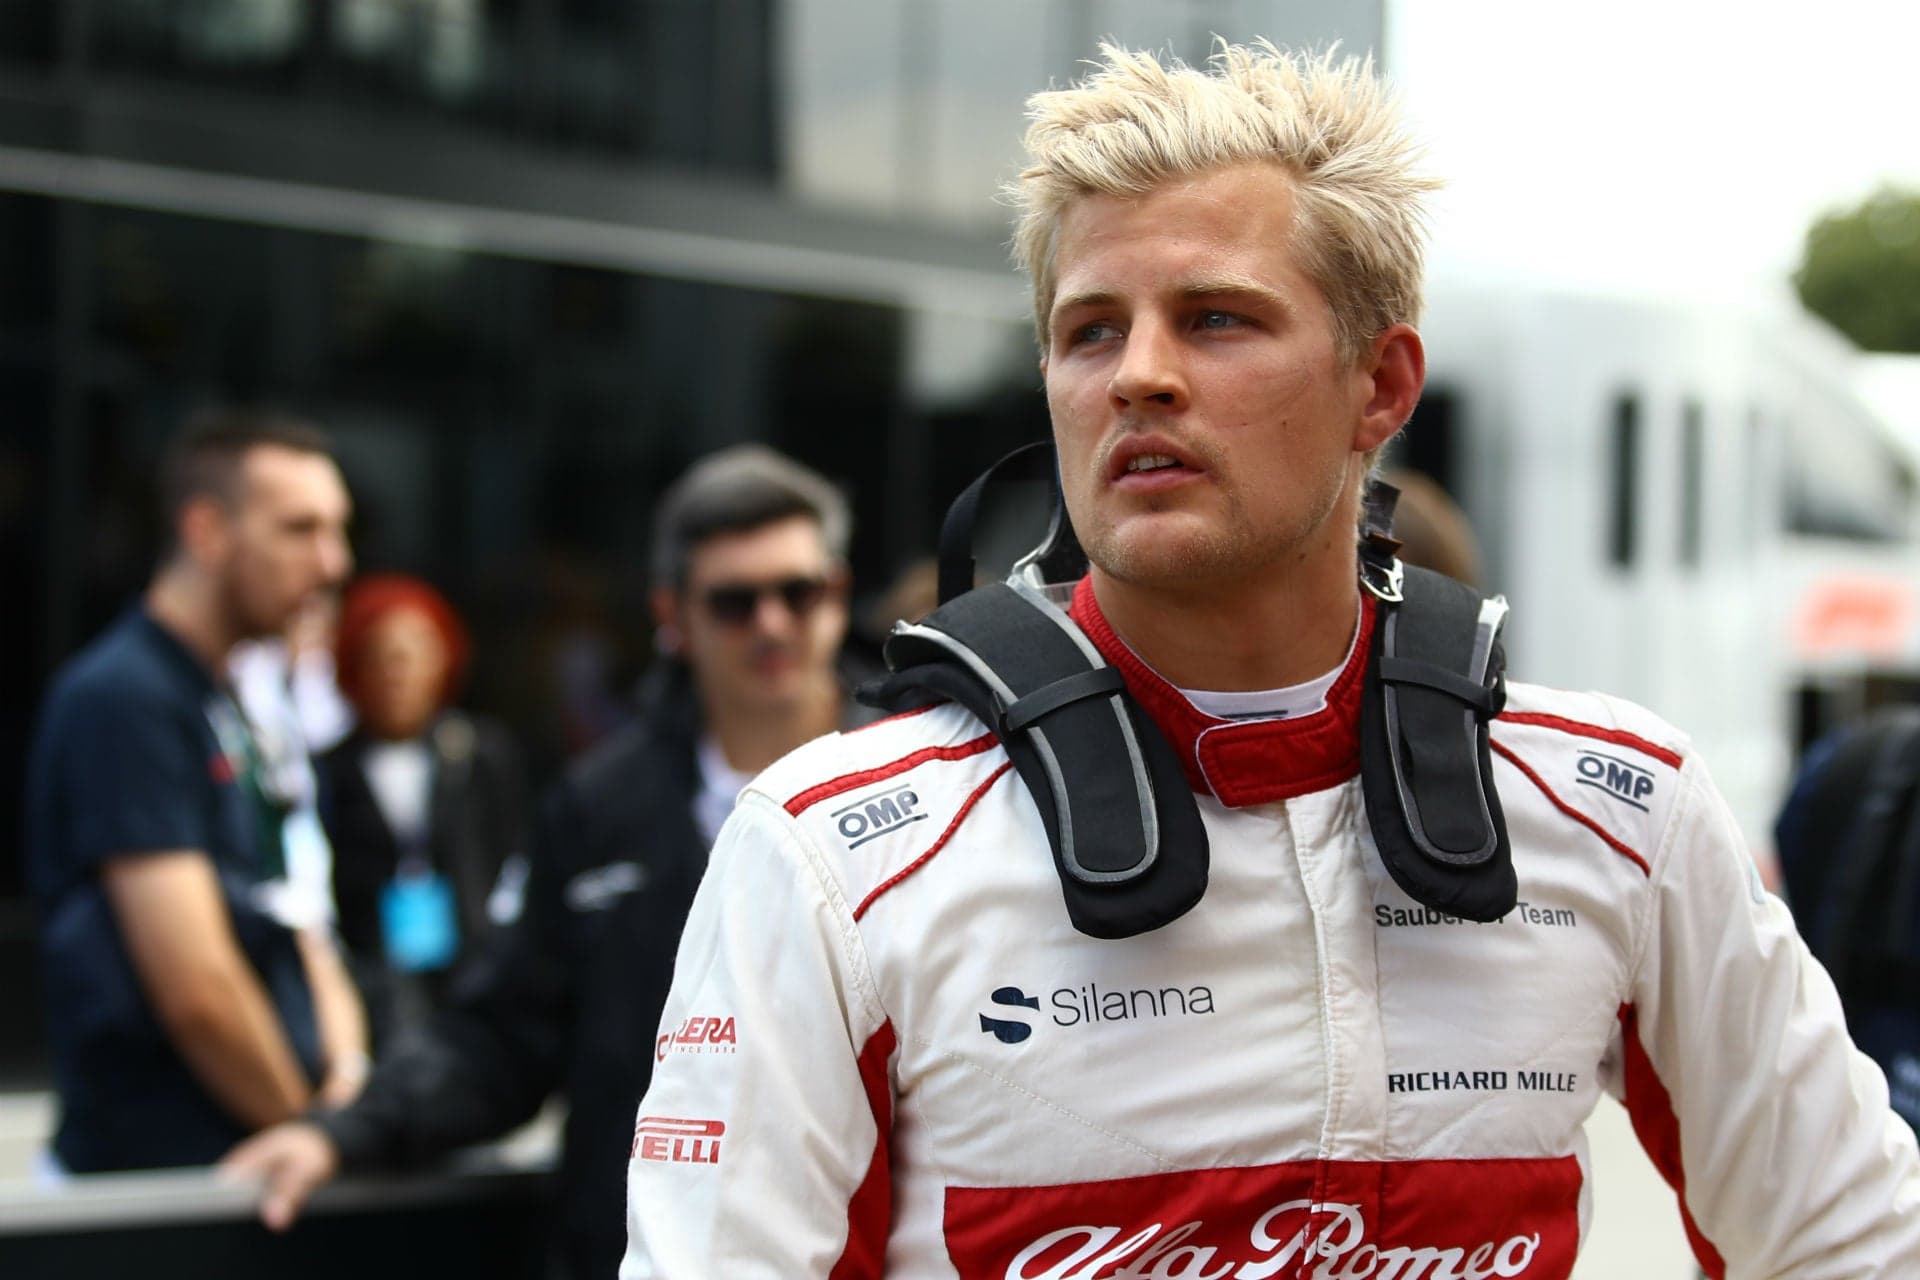 Departing Sauber F1 Driver Marcus Ericsson to Make Full-Time IndyCar Switch With SPM in 2019